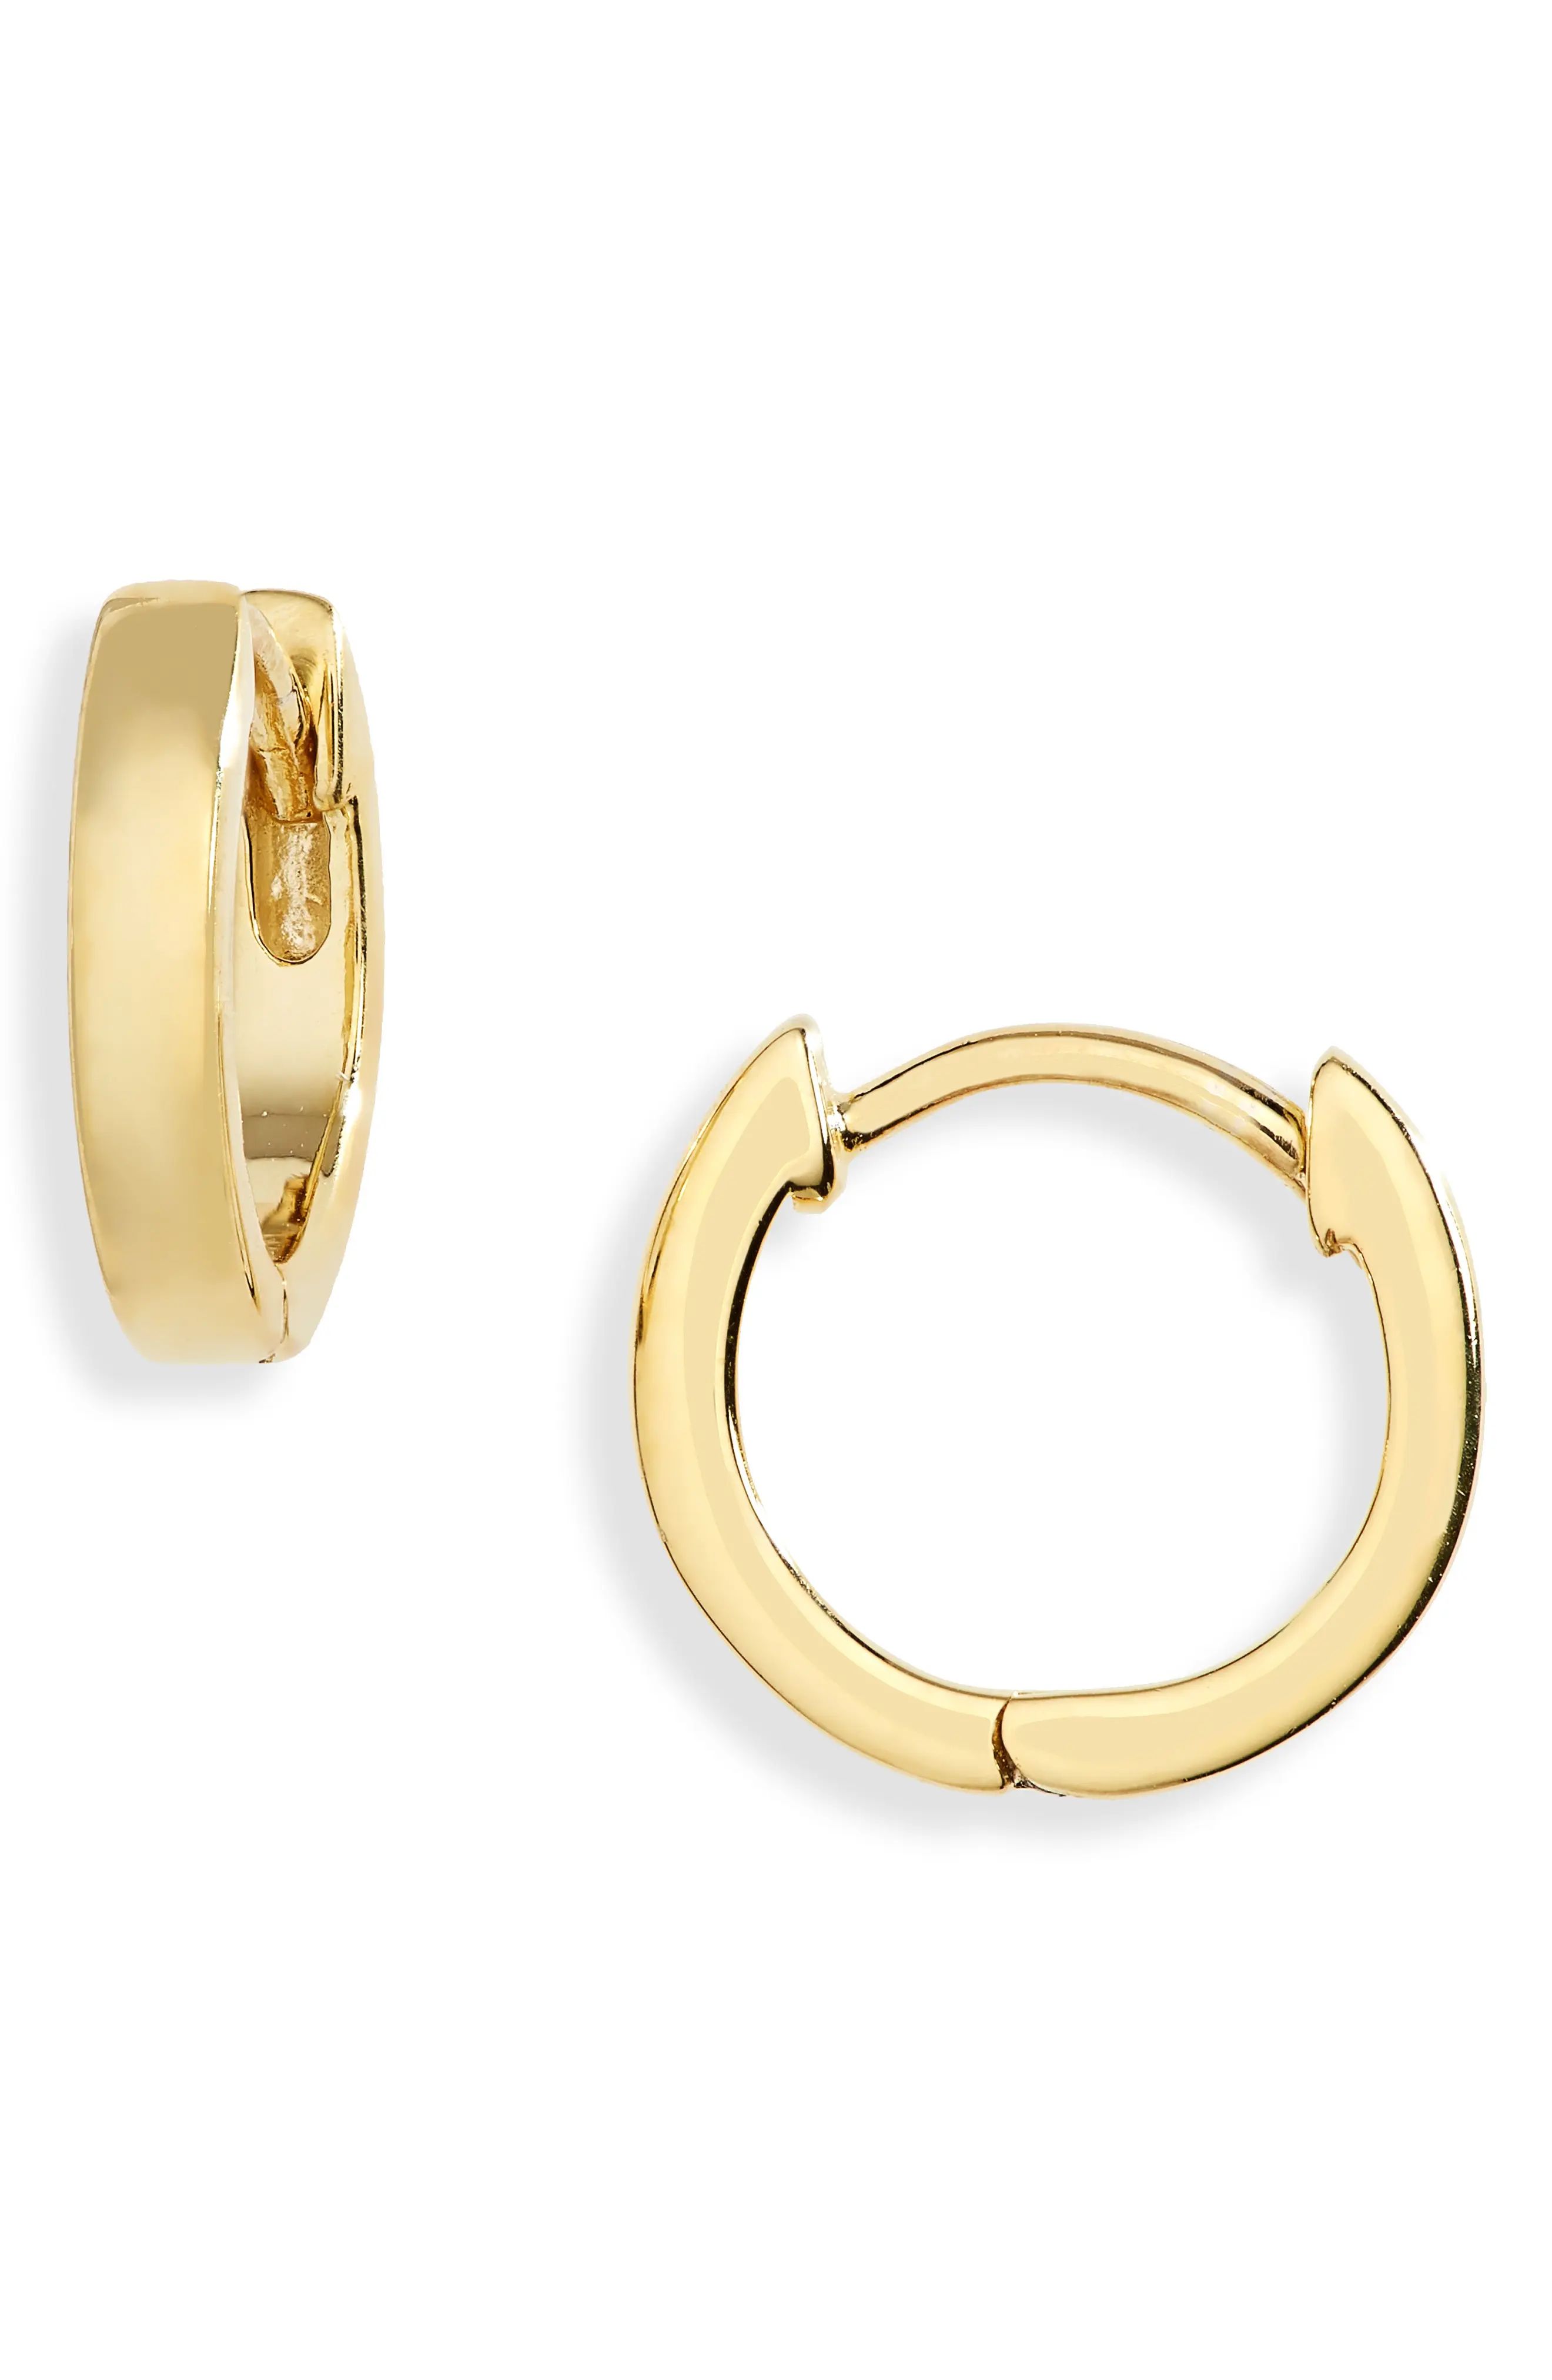 Madewell Delicate Collection Demi-Fine Huggie Mini Hoop Earrings in 14K Gold at Nordstrom | Nordstrom